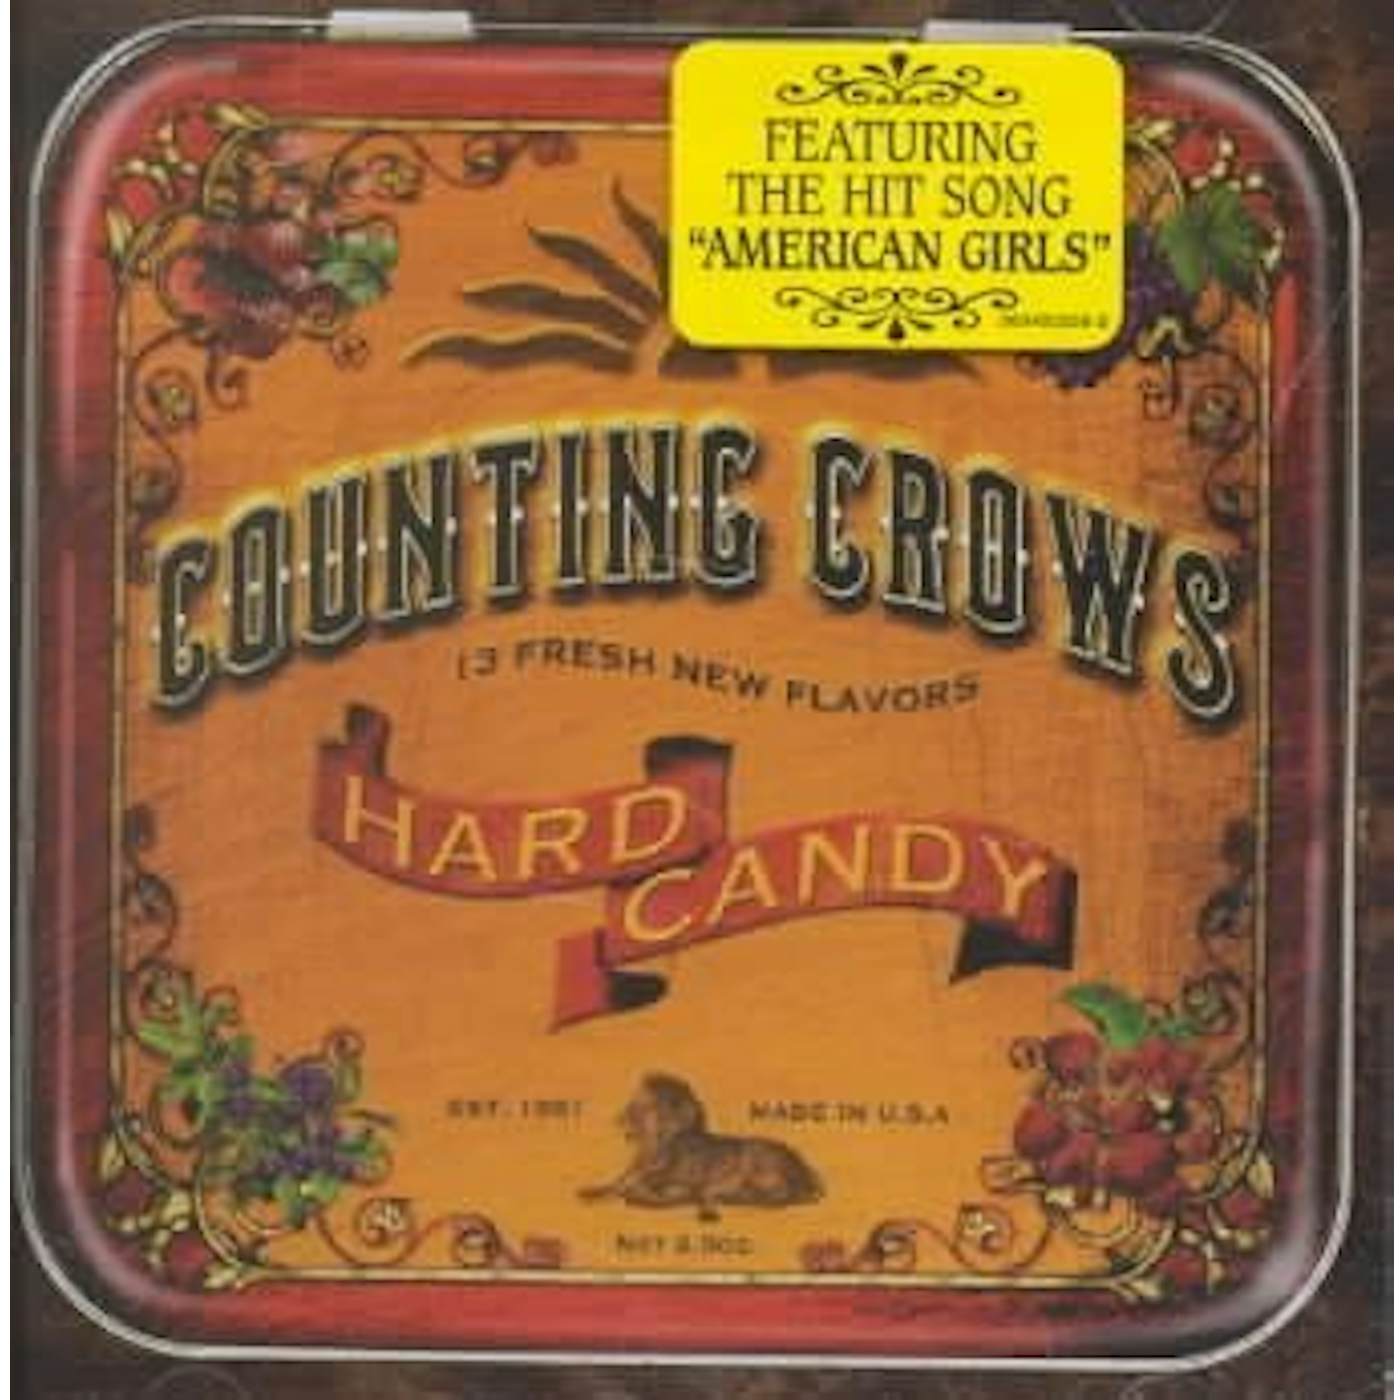 Counting Crows Hard Candy (Enhanced CD) CD